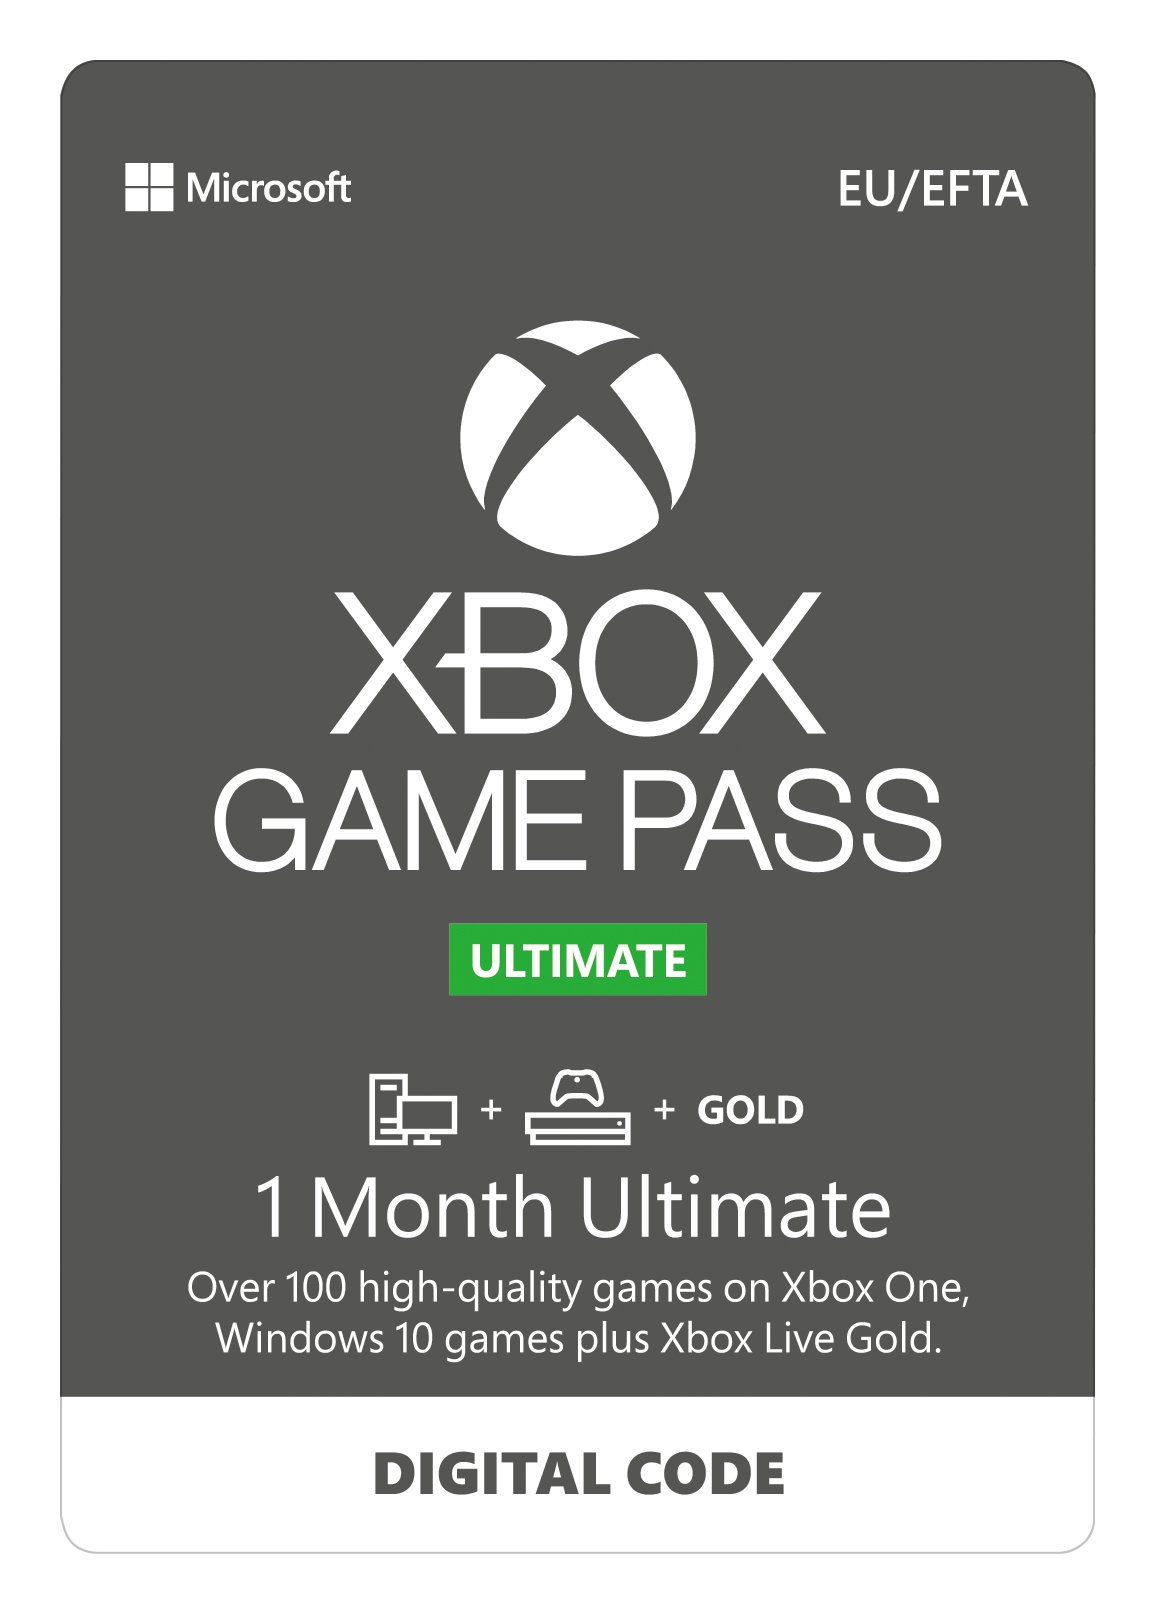 xbox game pass ultimate Â£1 or Â£1 for 3 months deal